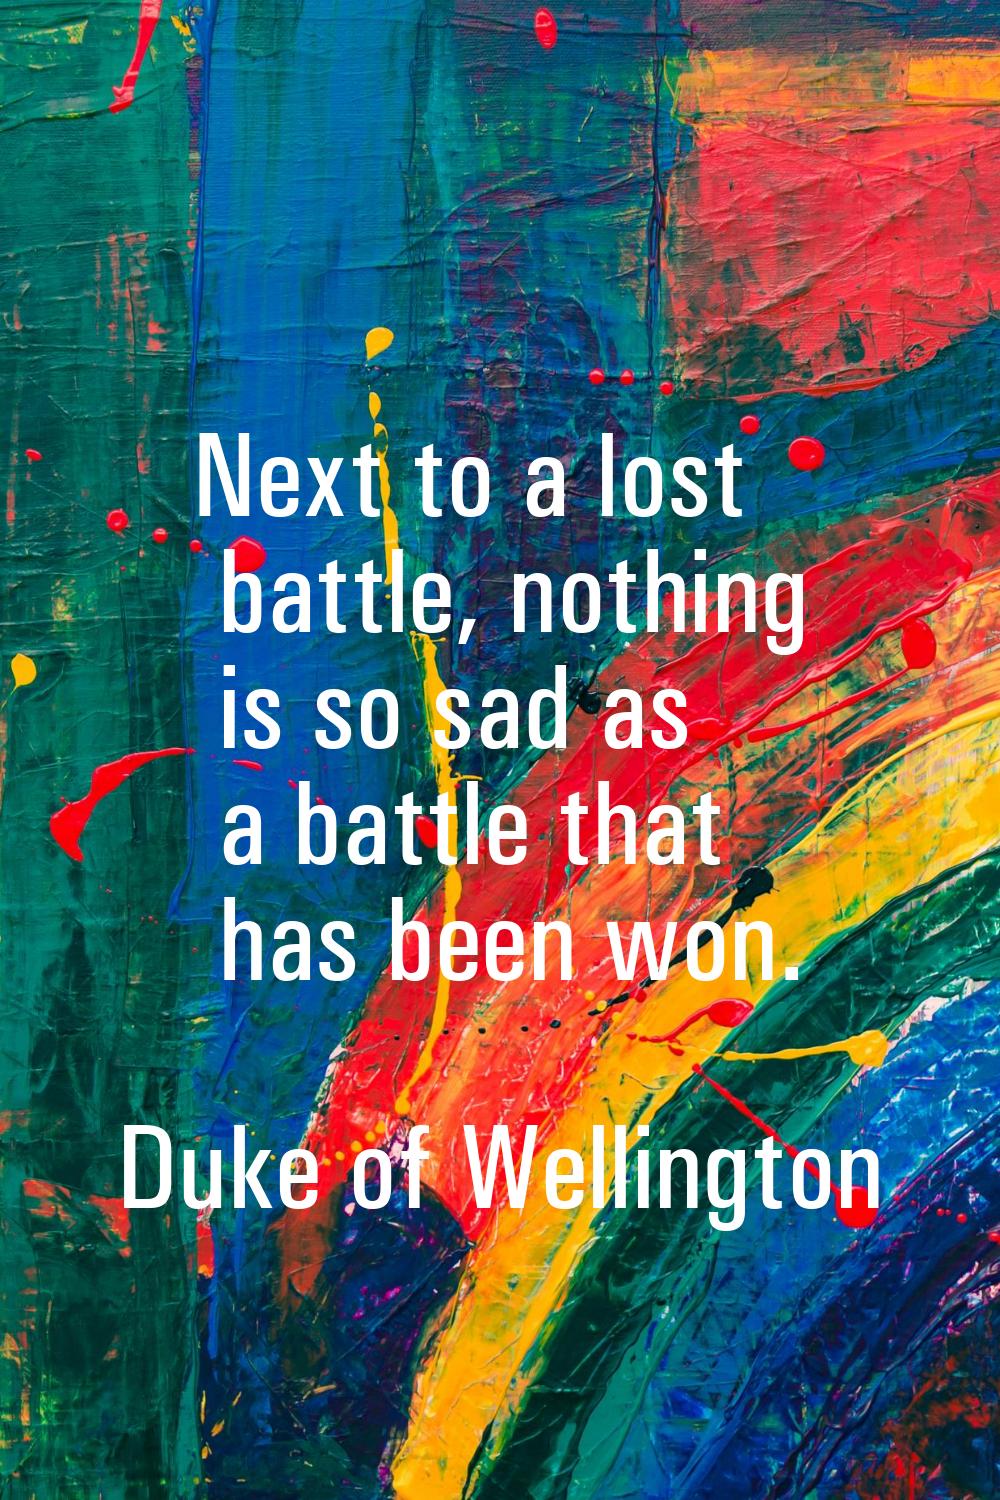 Next to a lost battle, nothing is so sad as a battle that has been won.